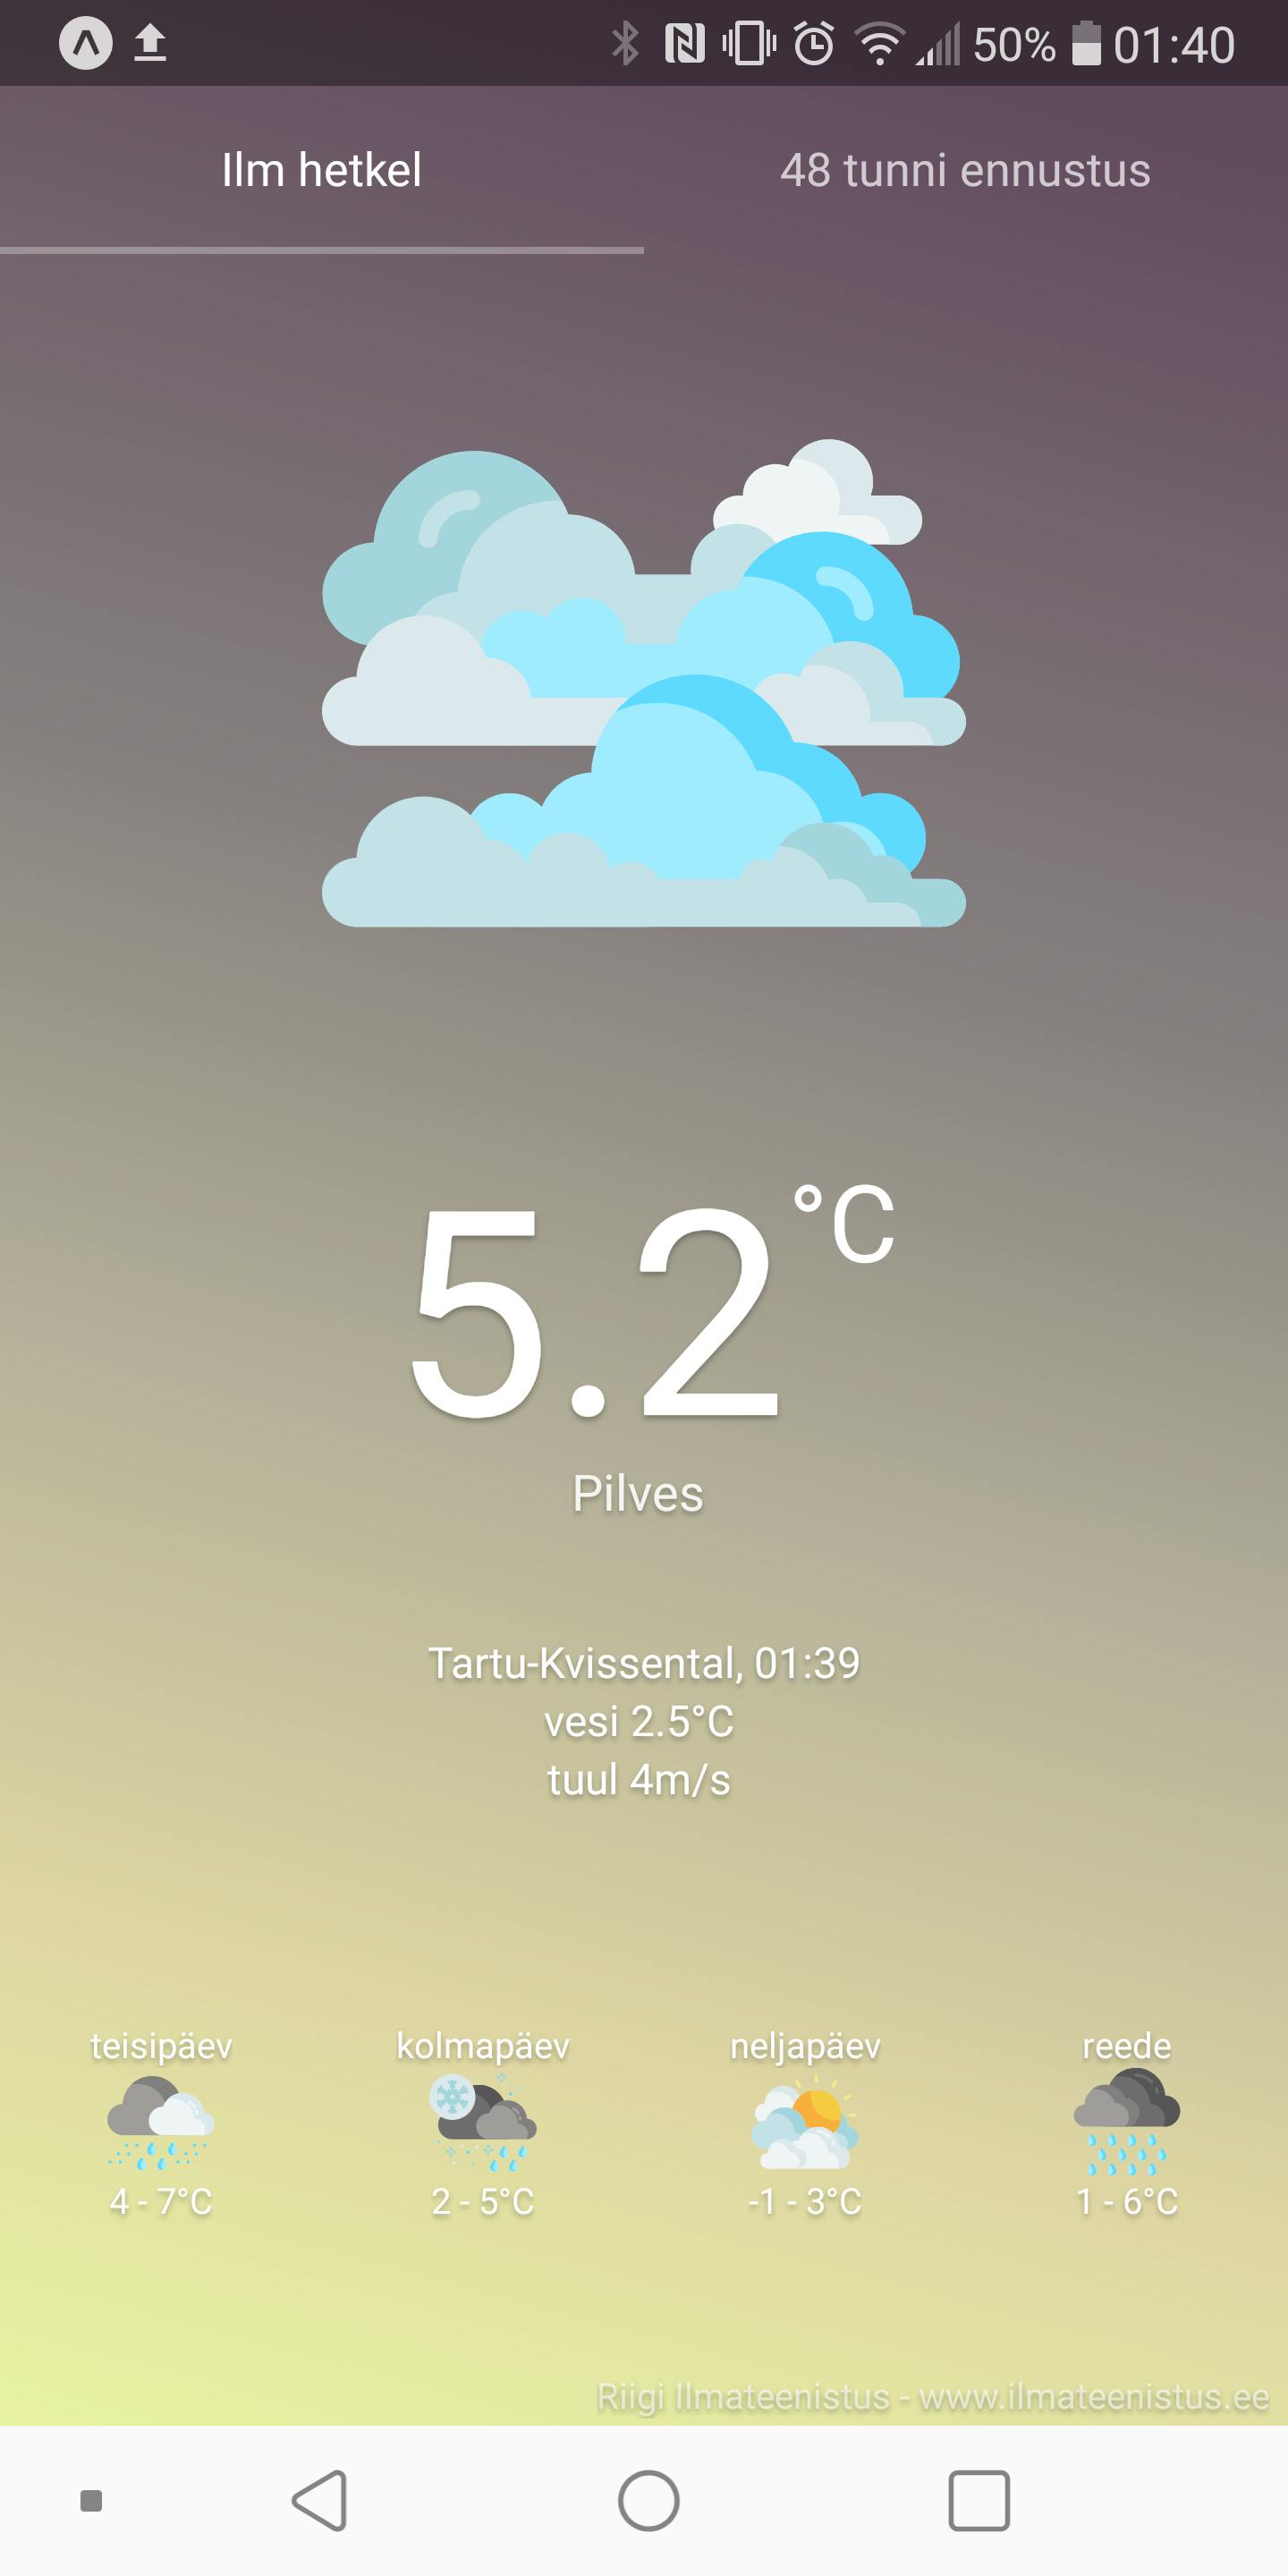 A weather app for current Estonian weather